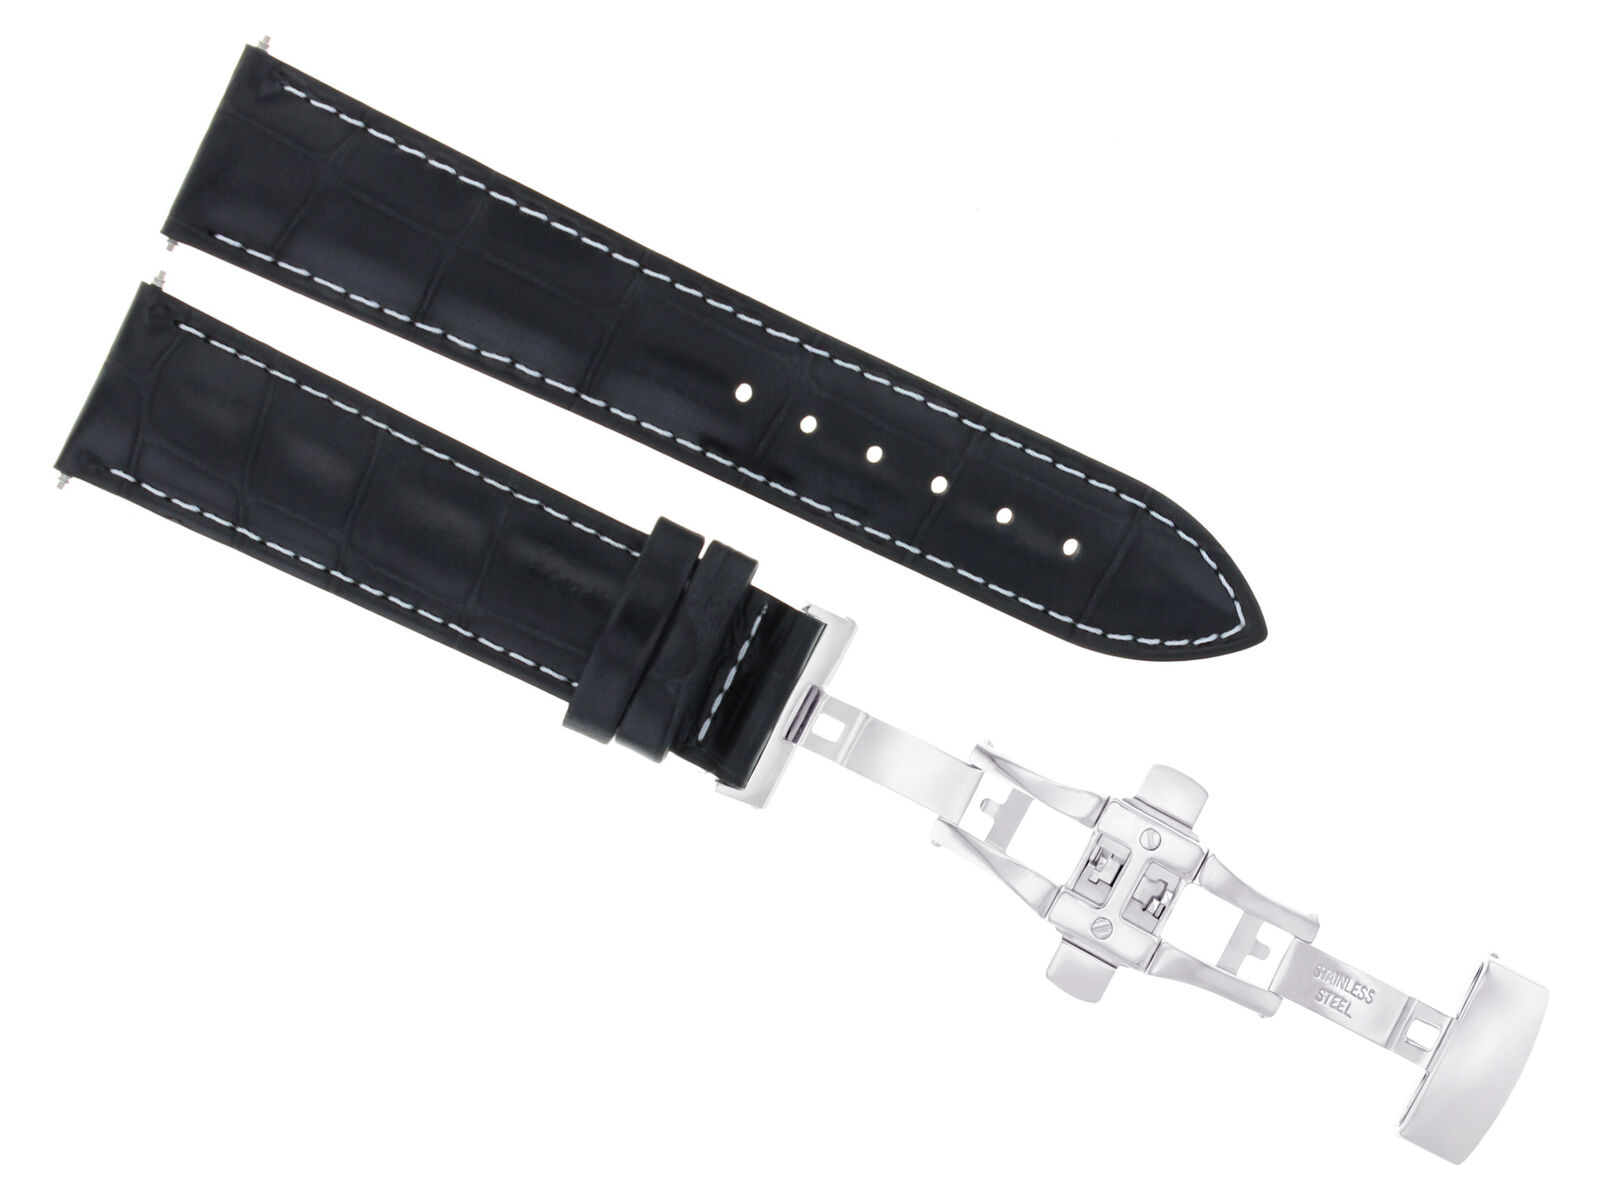 22MM LEATHER WATCH STRAP BAND FOR CHOPARD DEPLOYMENT CLASP BRACELET BLACK WS